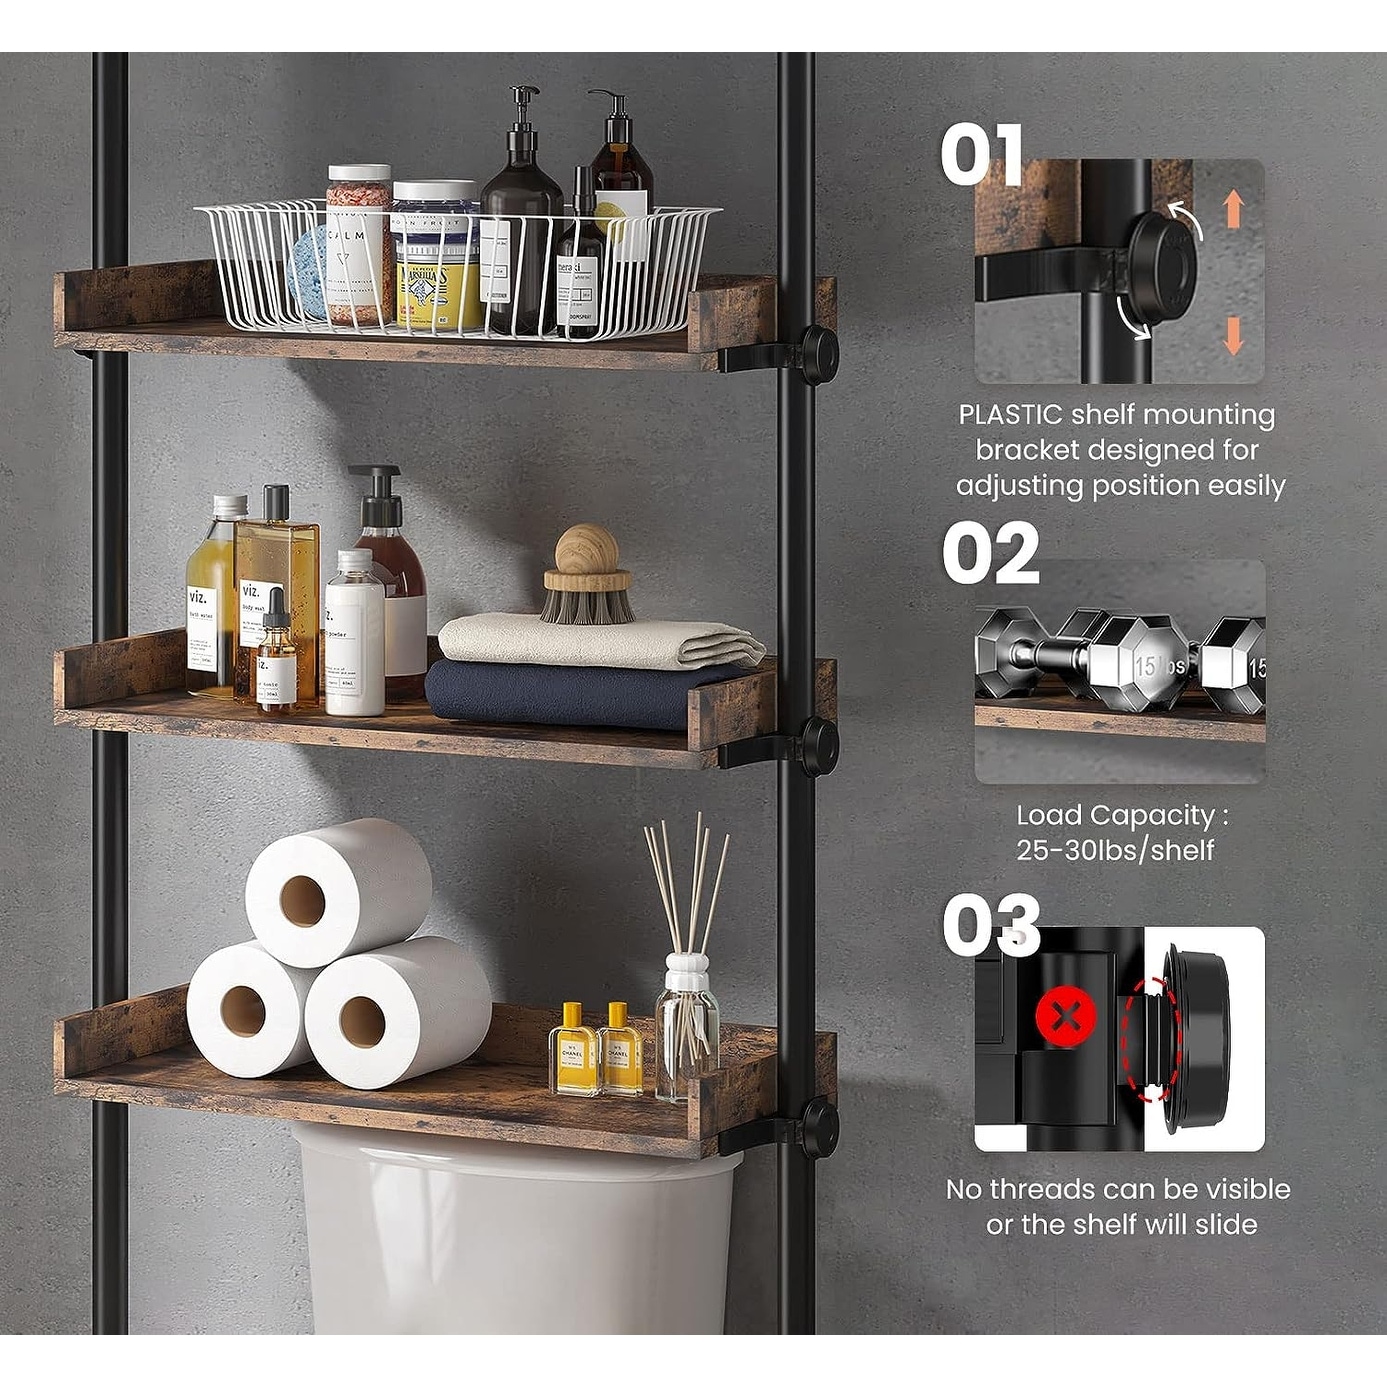 ALLZONE Bathroom Organizer, Over The Toilet Storage, 4-Tier Adjustable  Shelves for Small Room, Saver Space, 92 to 116 Inch Tall, Black